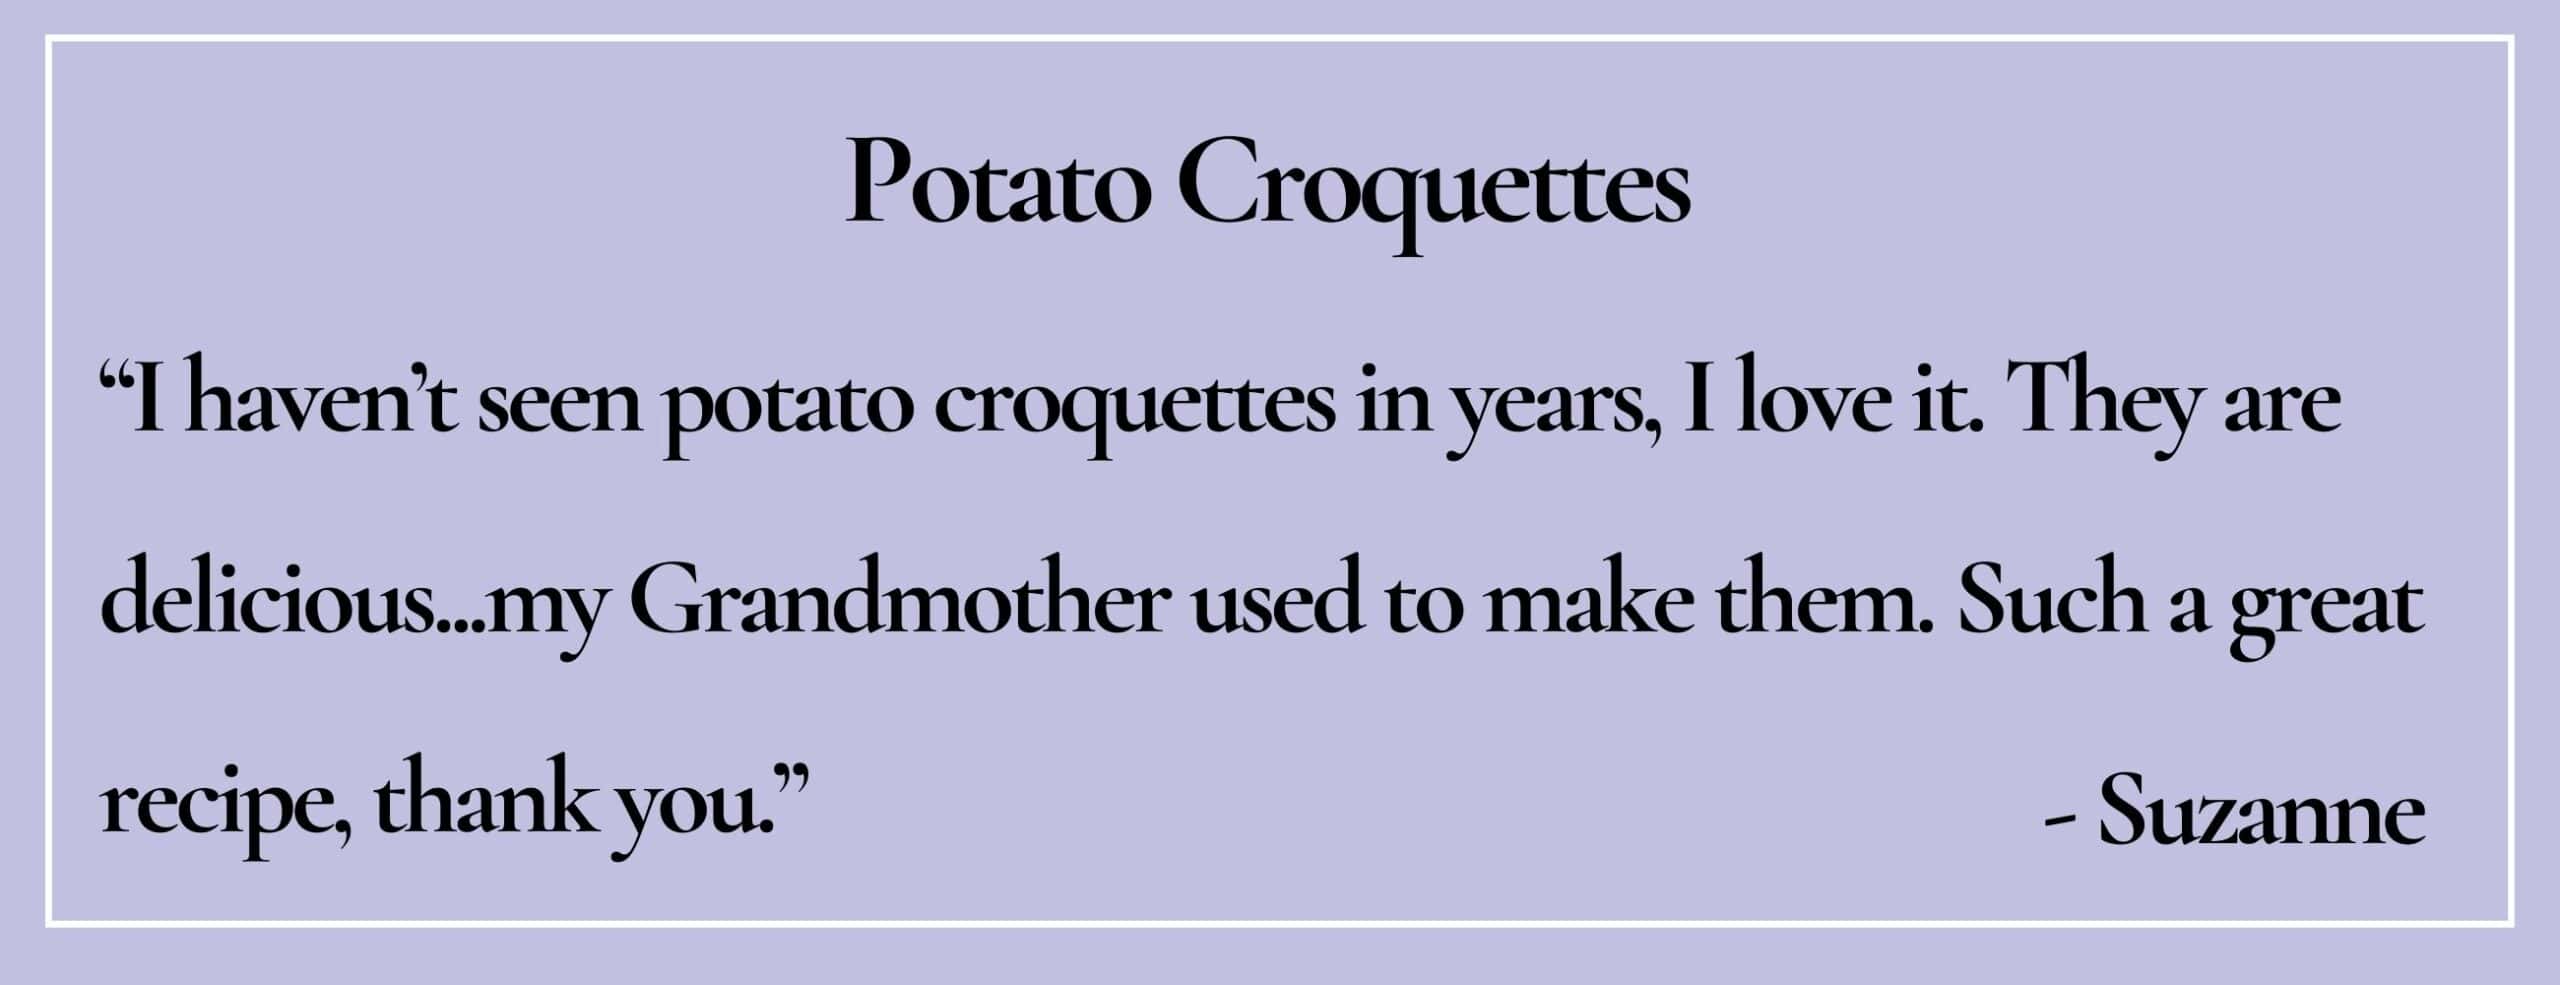 text box with paraphrase: They are delicious...my Grandmother used to make them. Such a great recipe, thank you...- Suzanne